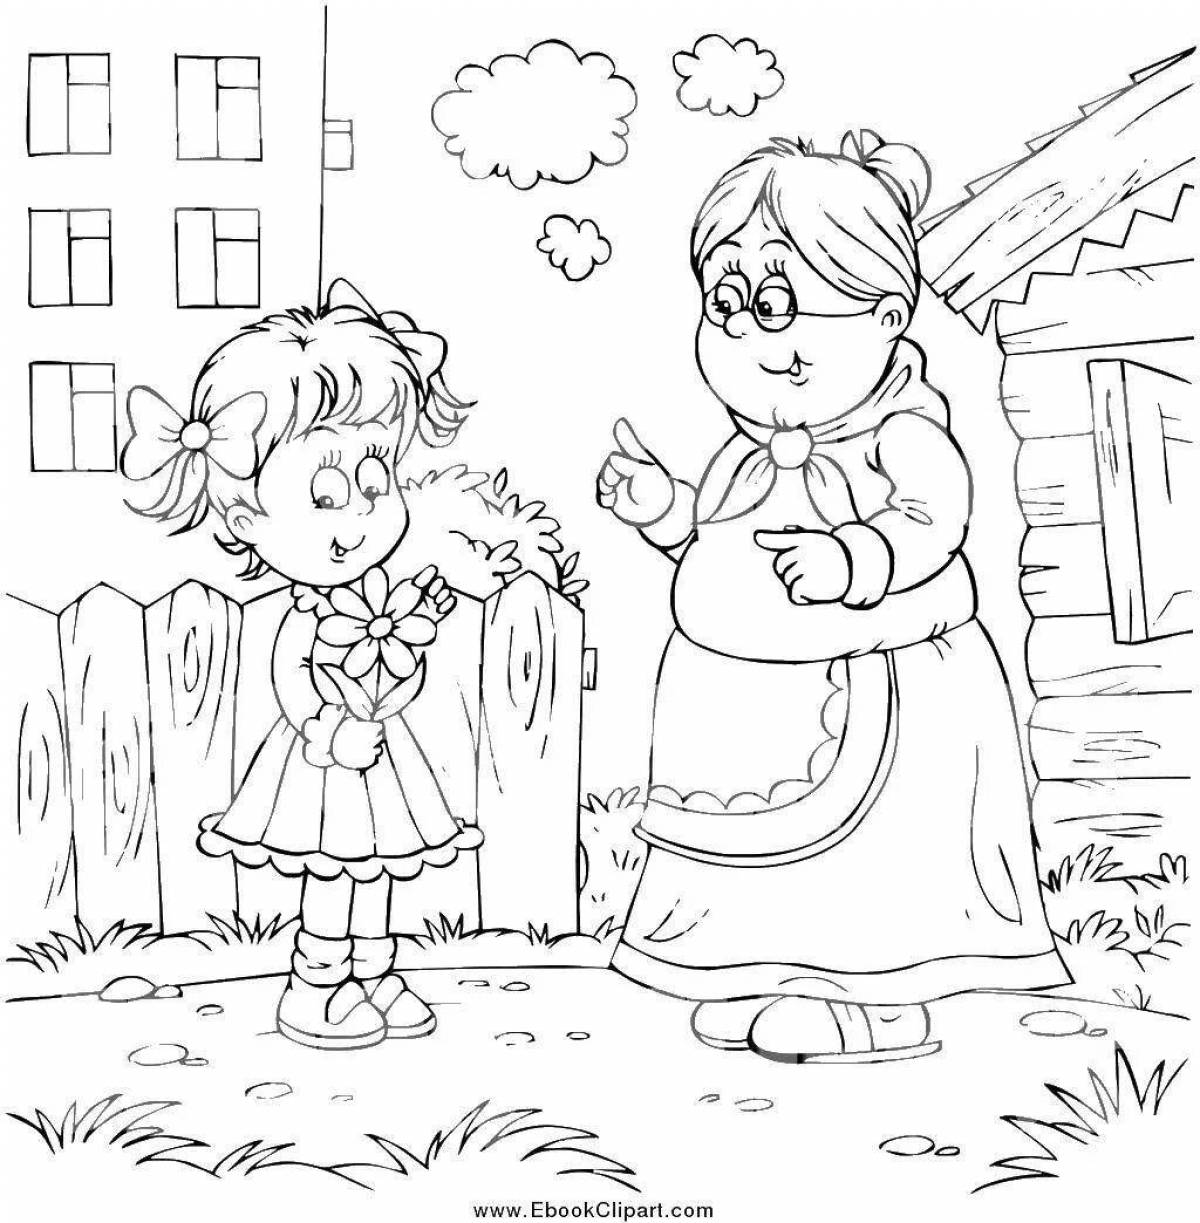 Coloring page divine grandmother and granddaughter